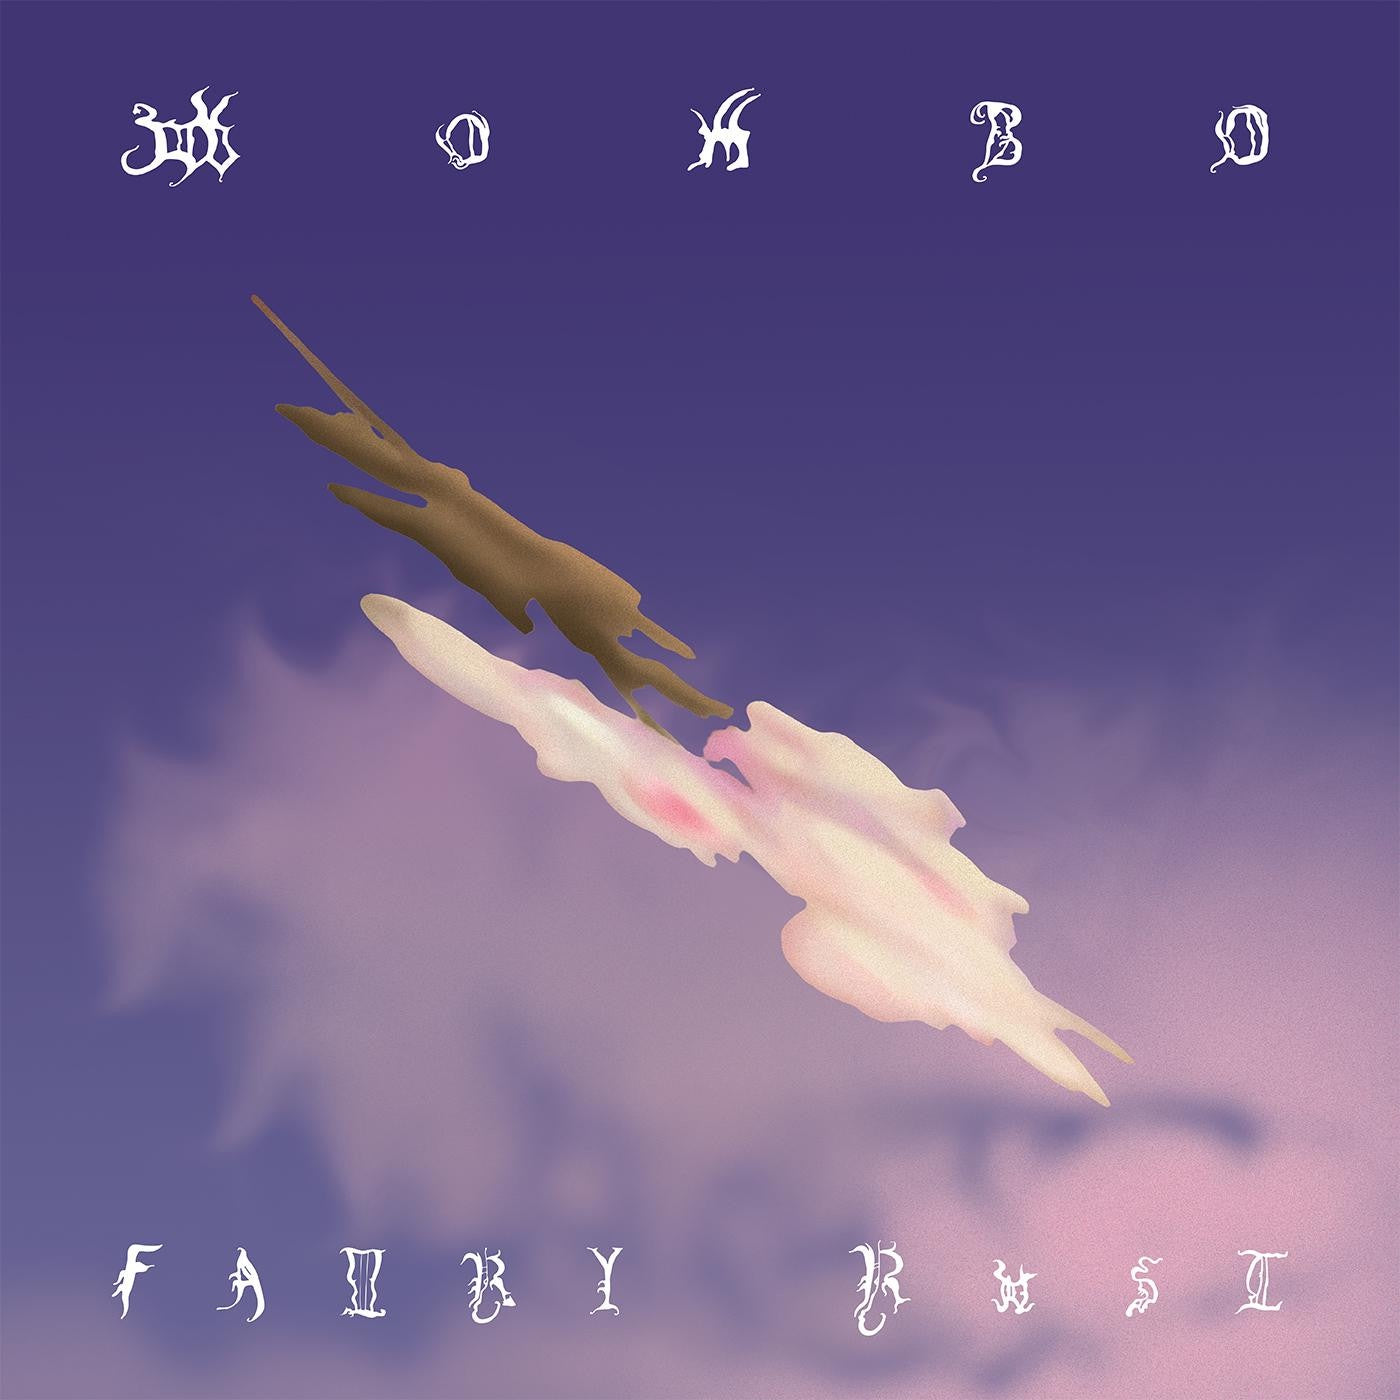 Wombo - Fairy Rust - New LP Record 2022 Fire Talk Indie Exclusive Melted Cloud Vinyl - Indie Rock / Post-Punk